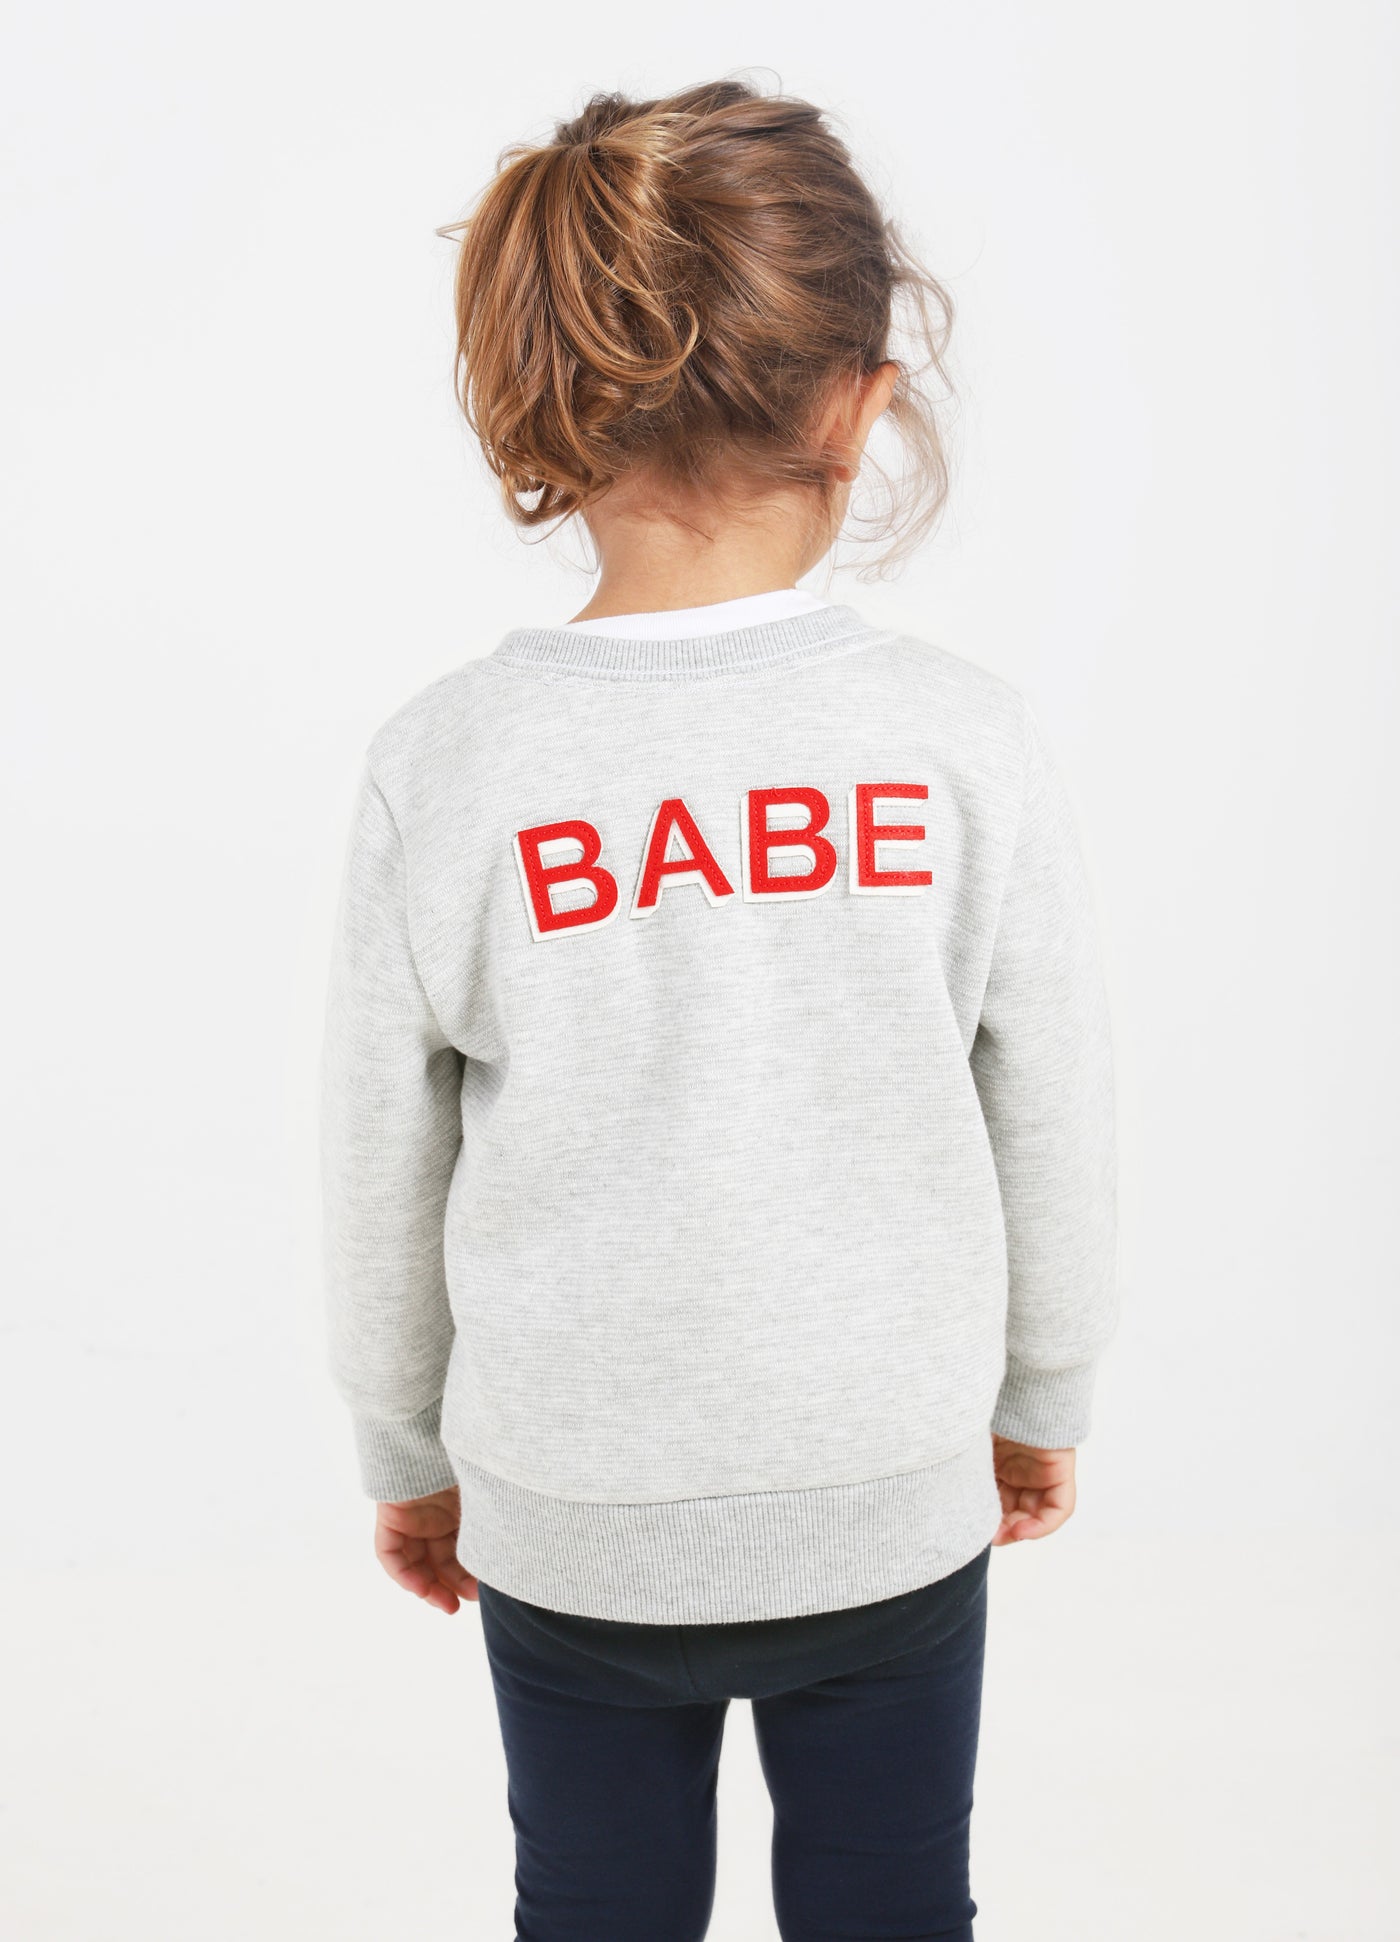 Model is 3 years old and wearing a 3T.||Light Heather Grey